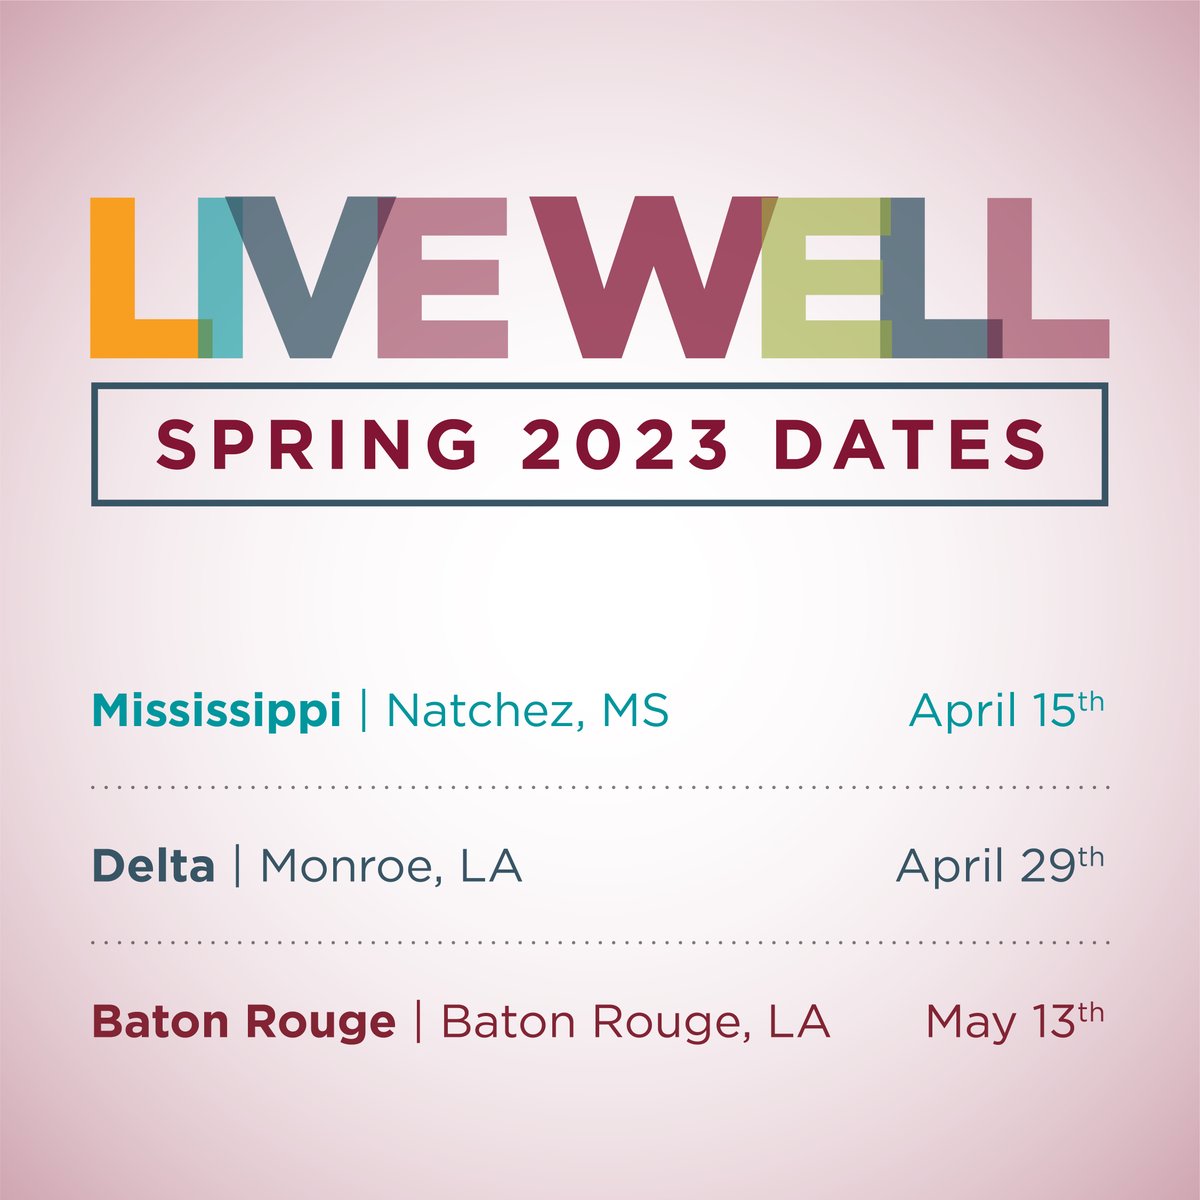 Take charge of your health, protect your loved ones & care for your #community. Time to LIVE WELL! Free #cancerscreenings, food & fun for everyone.👇
📆Mississippi: 4/15 marybird.org/livewellms
📆Delta: 4/29 marybird.org/livewelldelta
📆Baton Rouge: 5/13 marybird.org/livewellbr